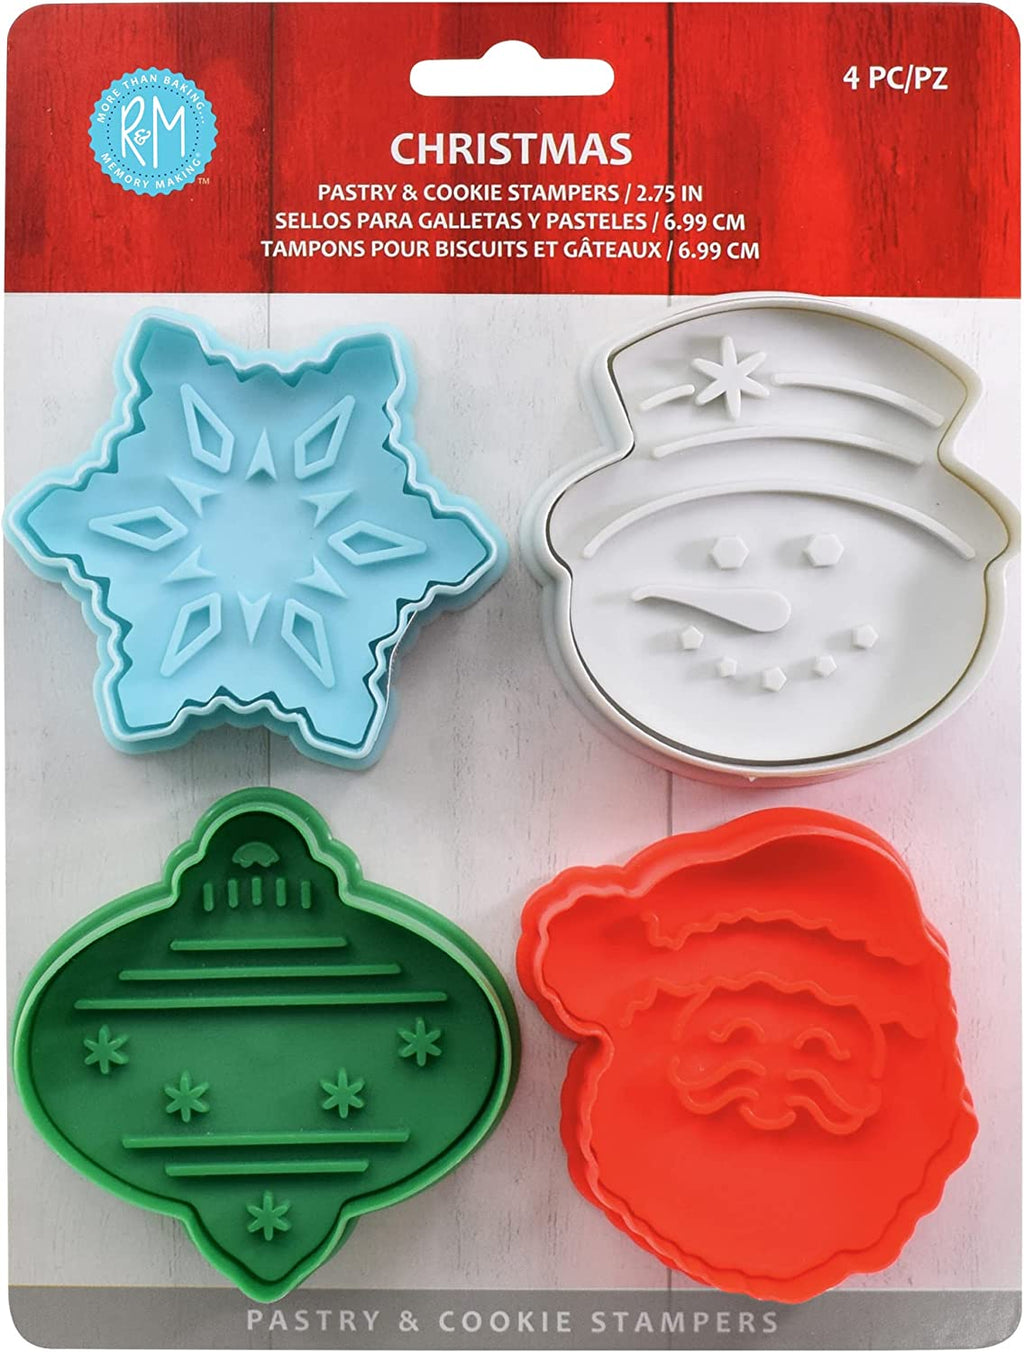 Large Christmas Cookie/Pastry Stampers